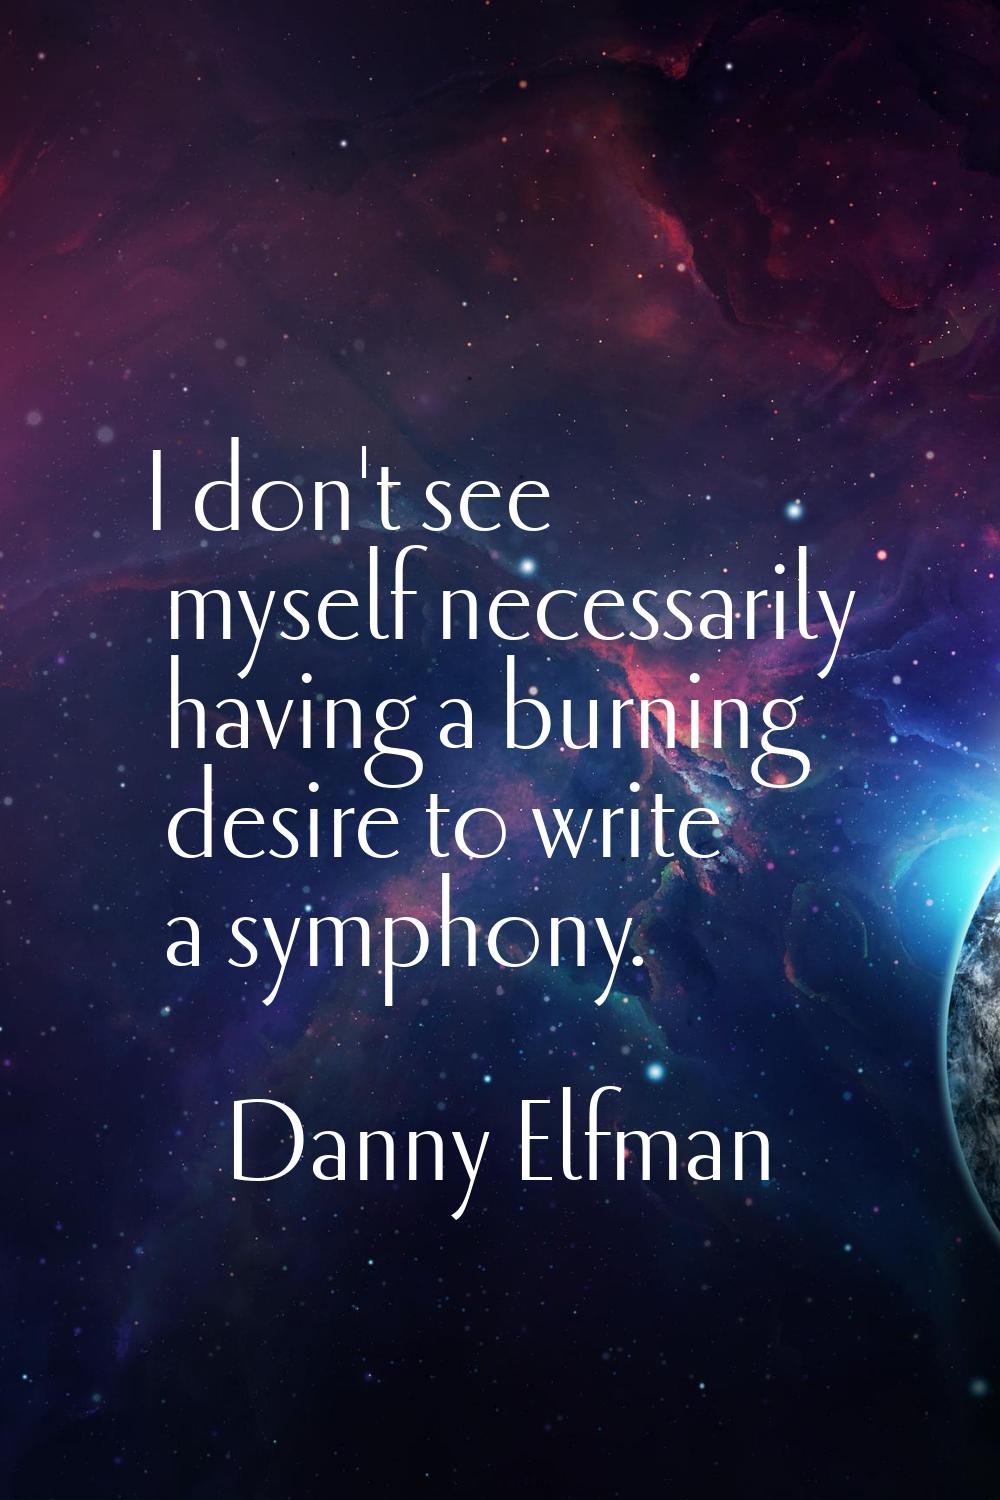 I don't see myself necessarily having a burning desire to write a symphony.